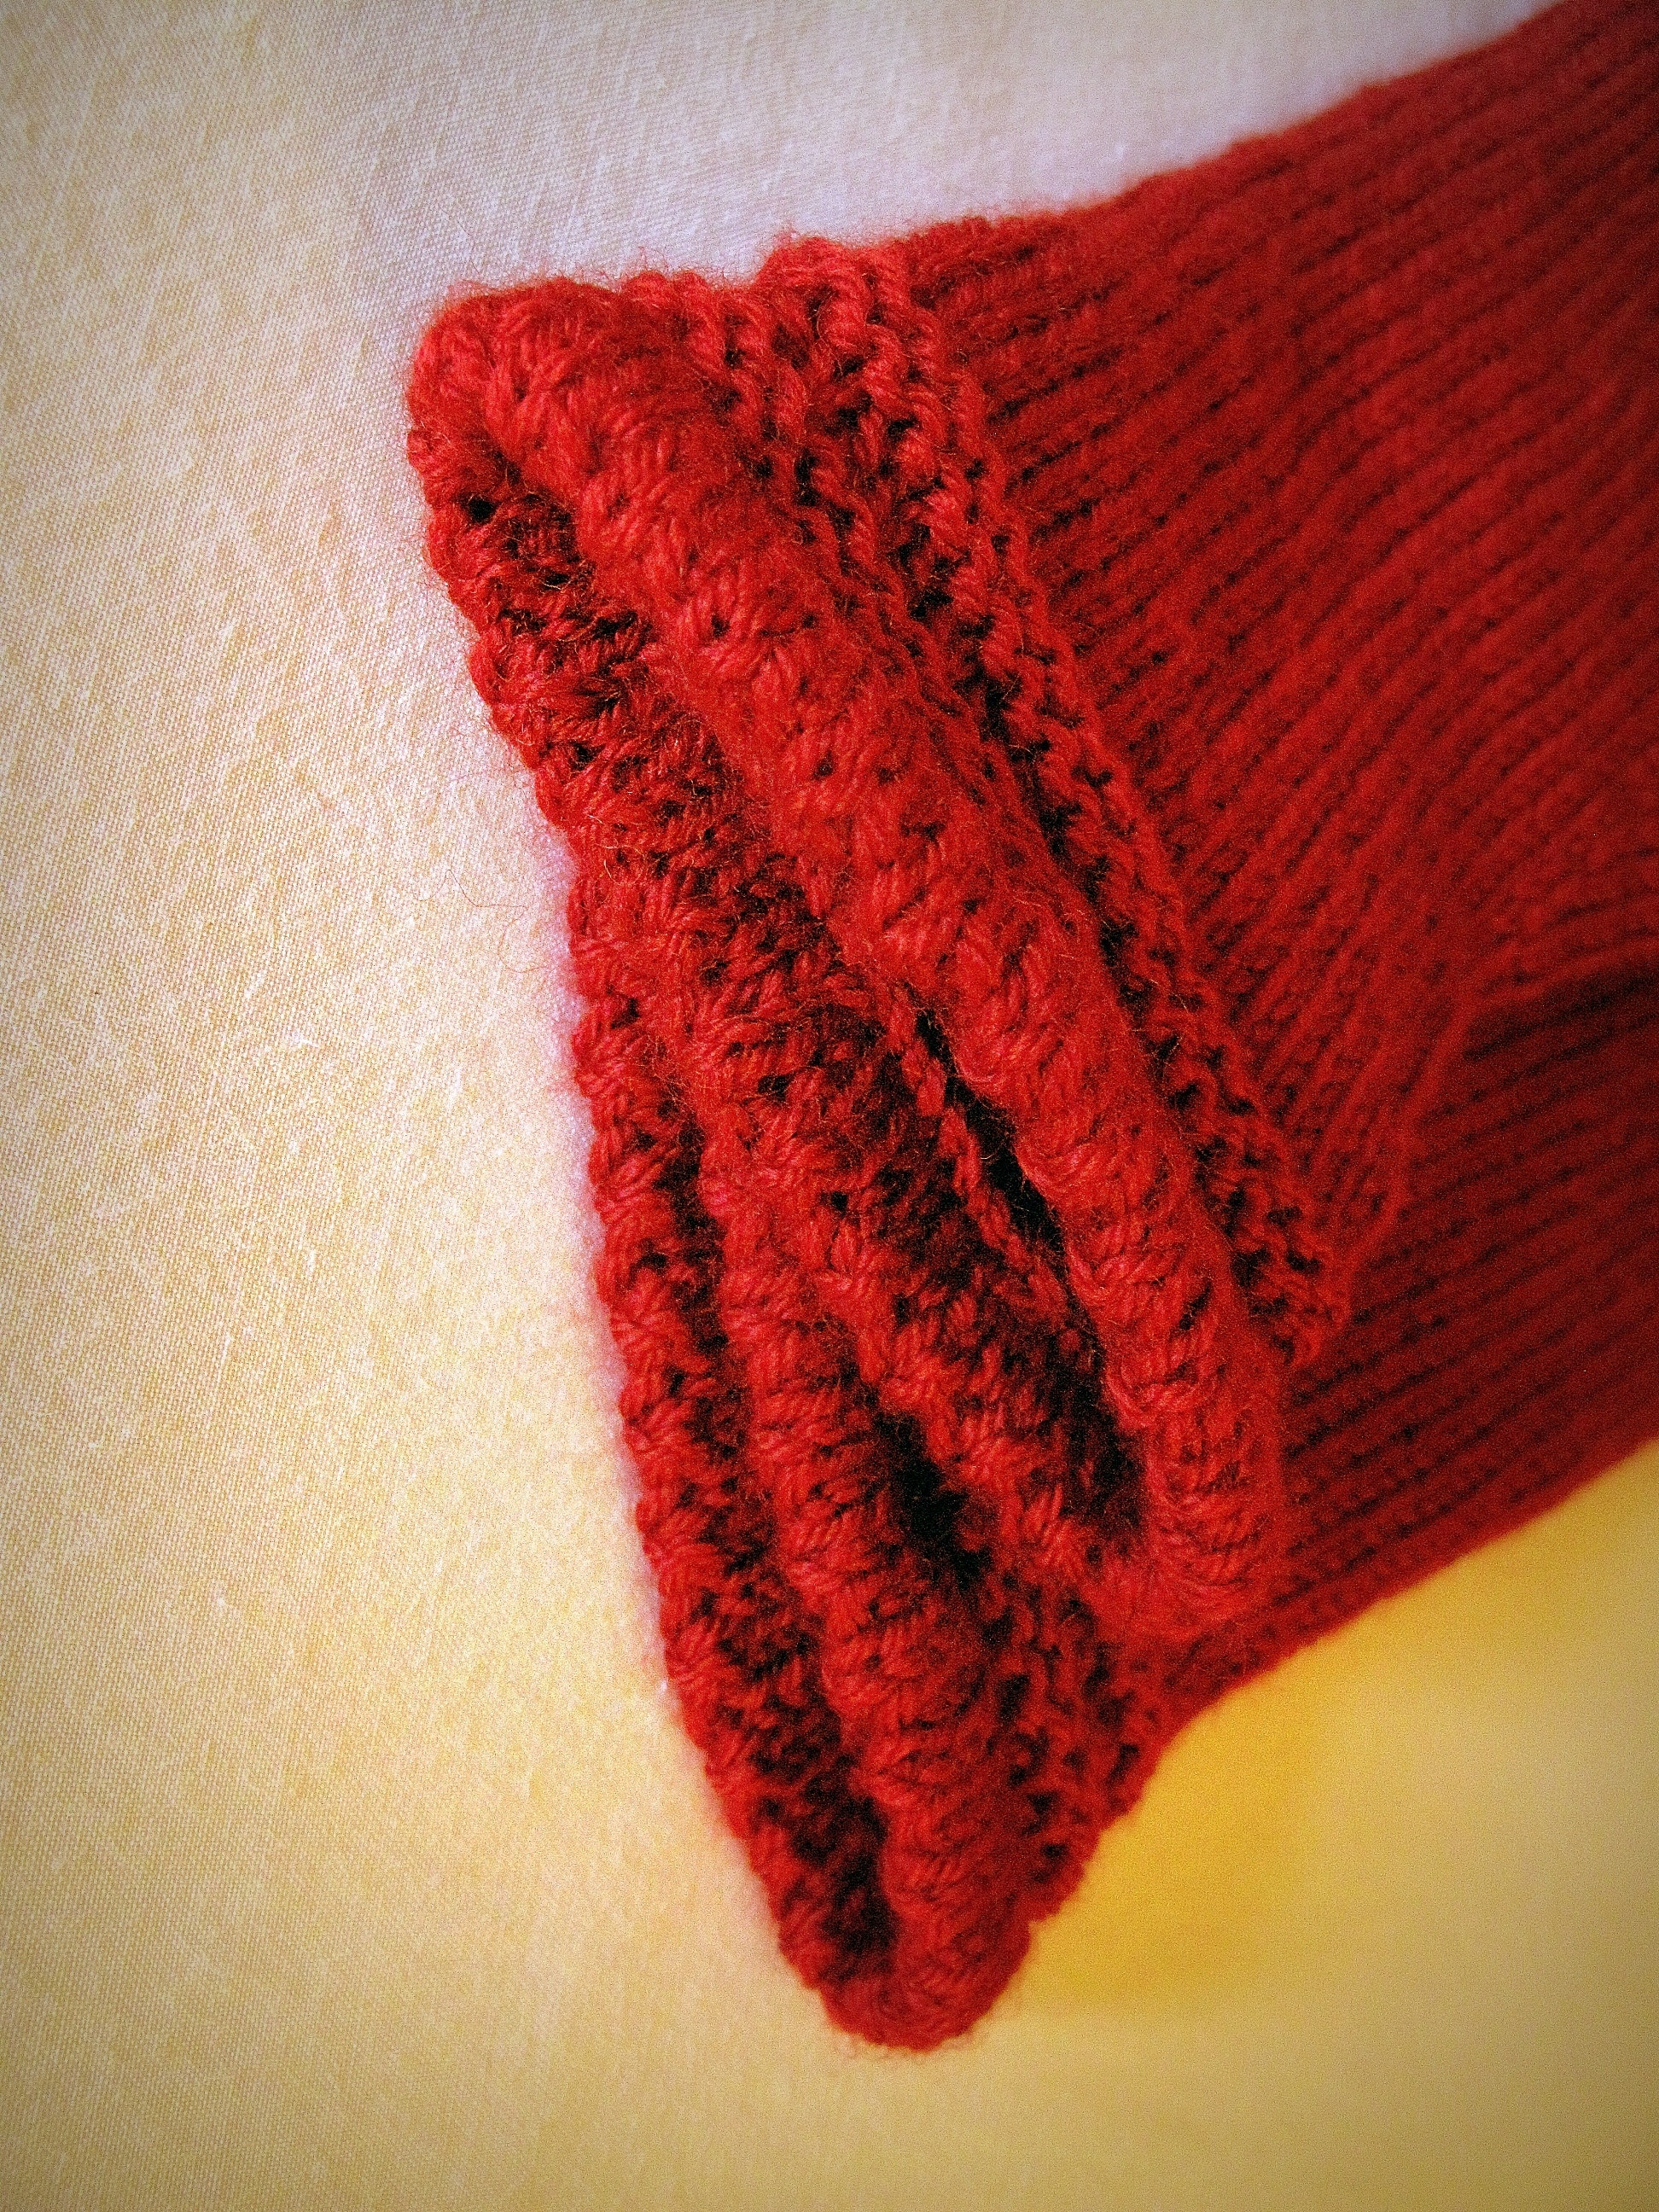 red knit textile